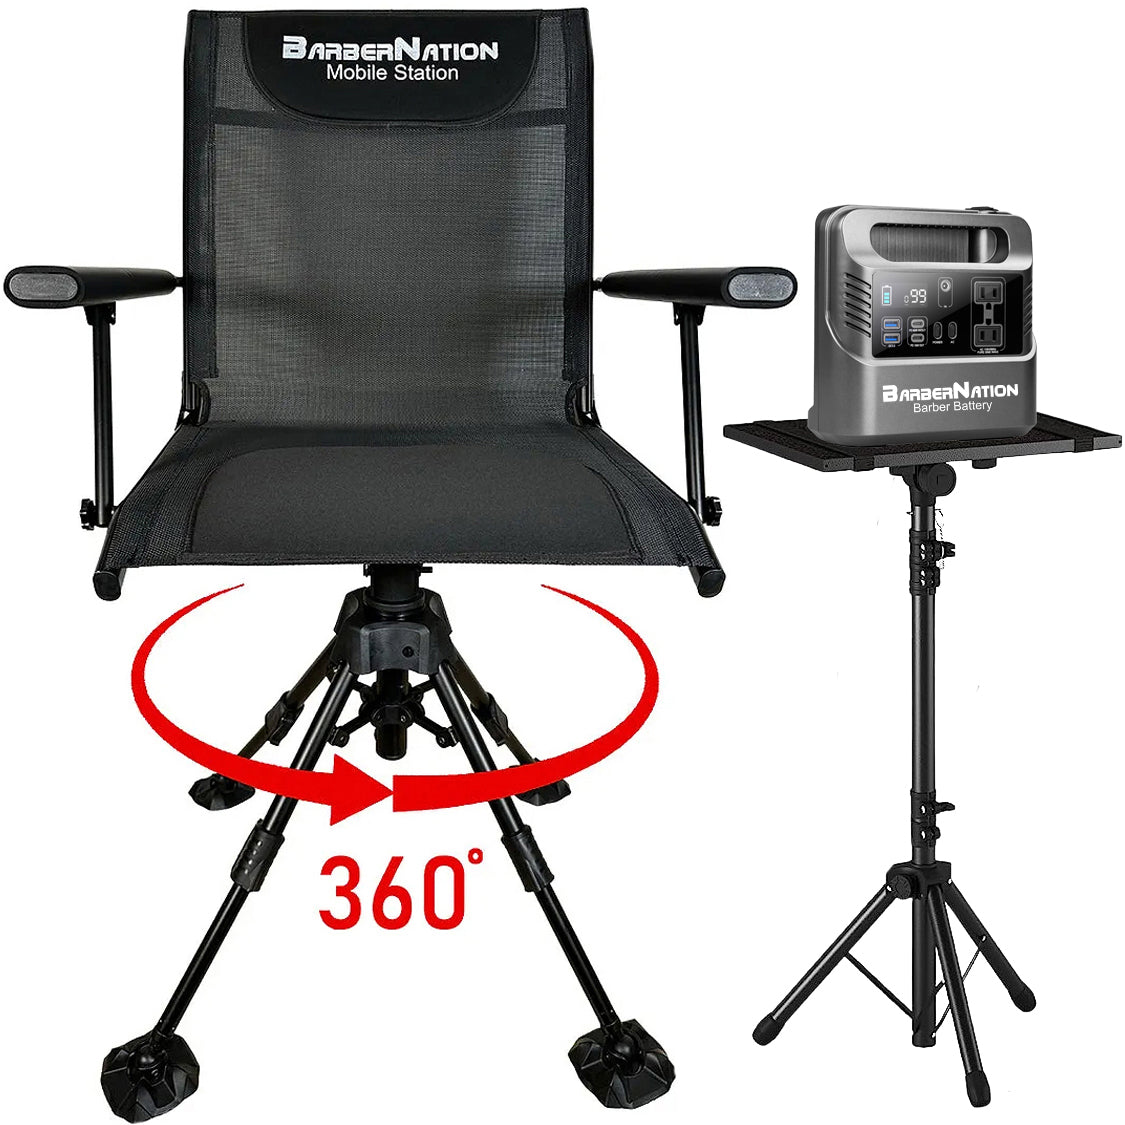 BarberNation Mobile Station - Cut Hair Anywhere Chair & Travel Tray